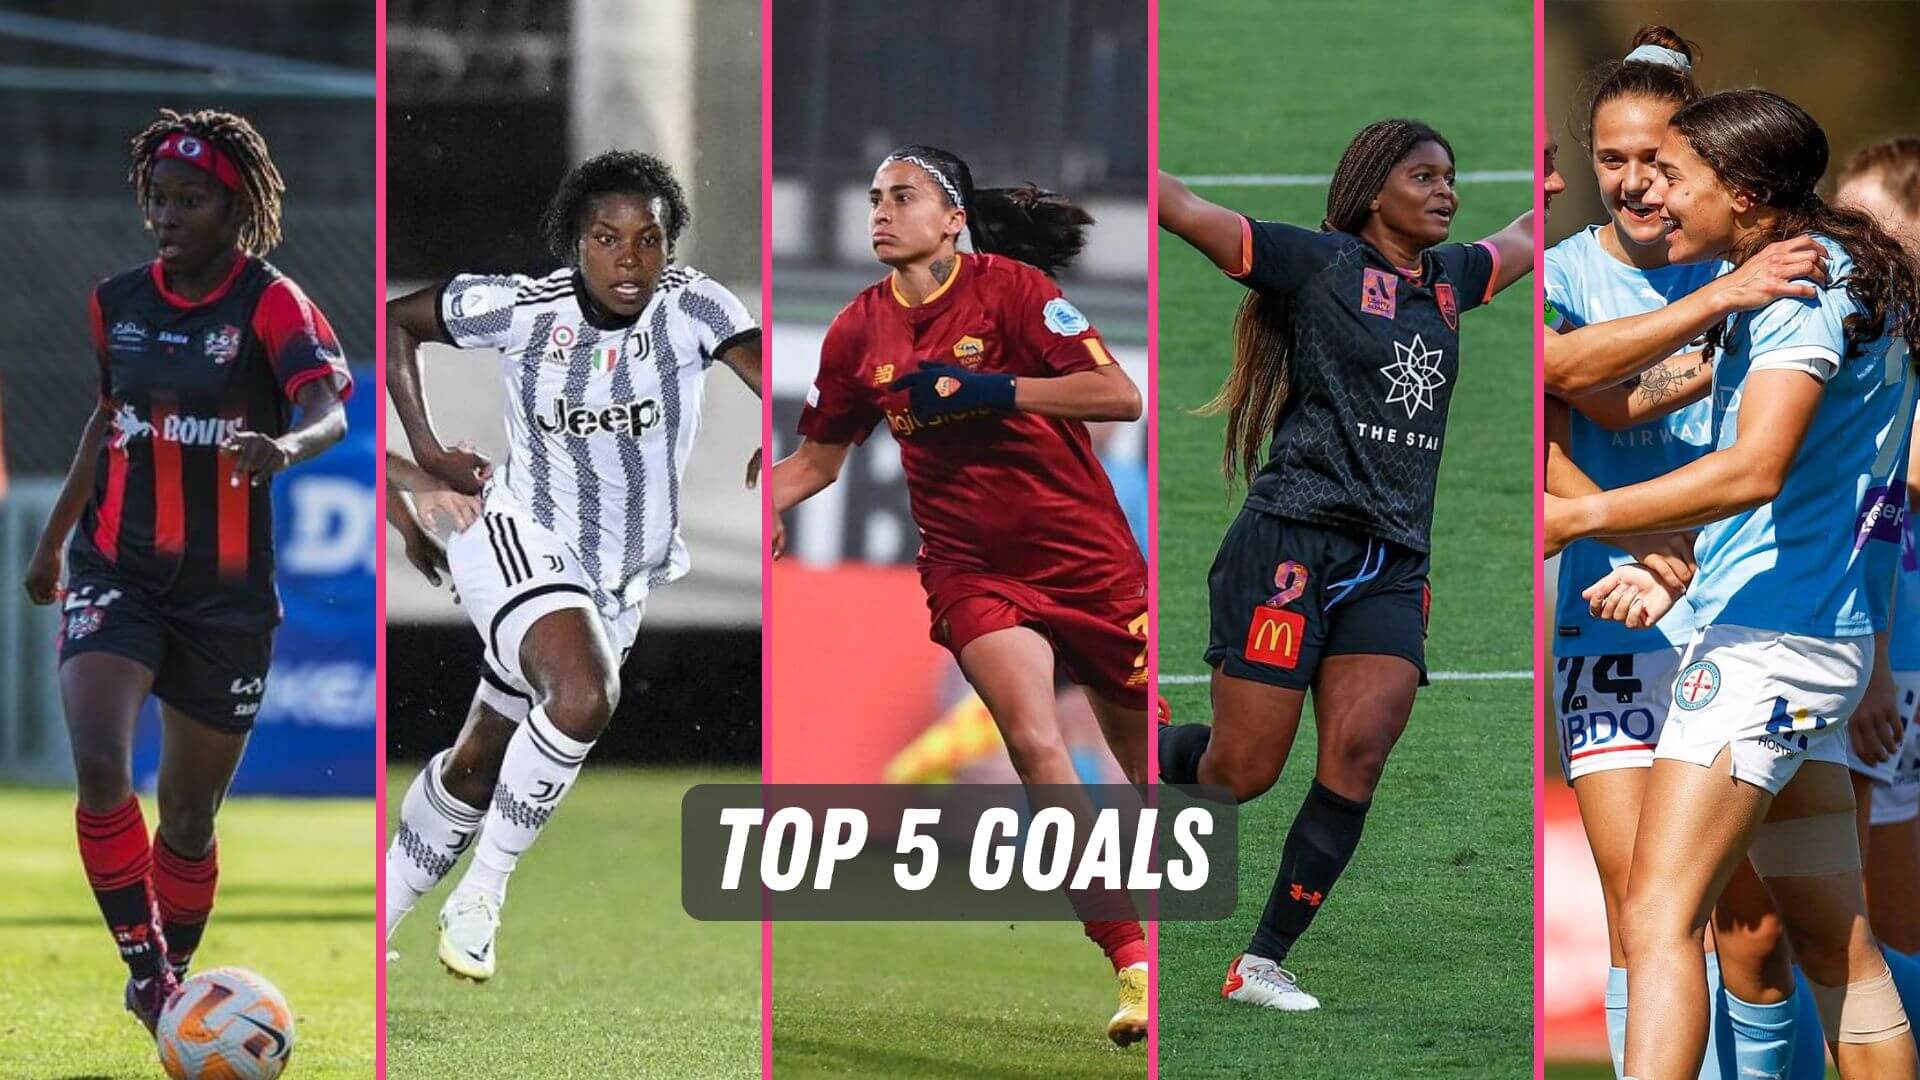 The best women's soccer goals from around the world